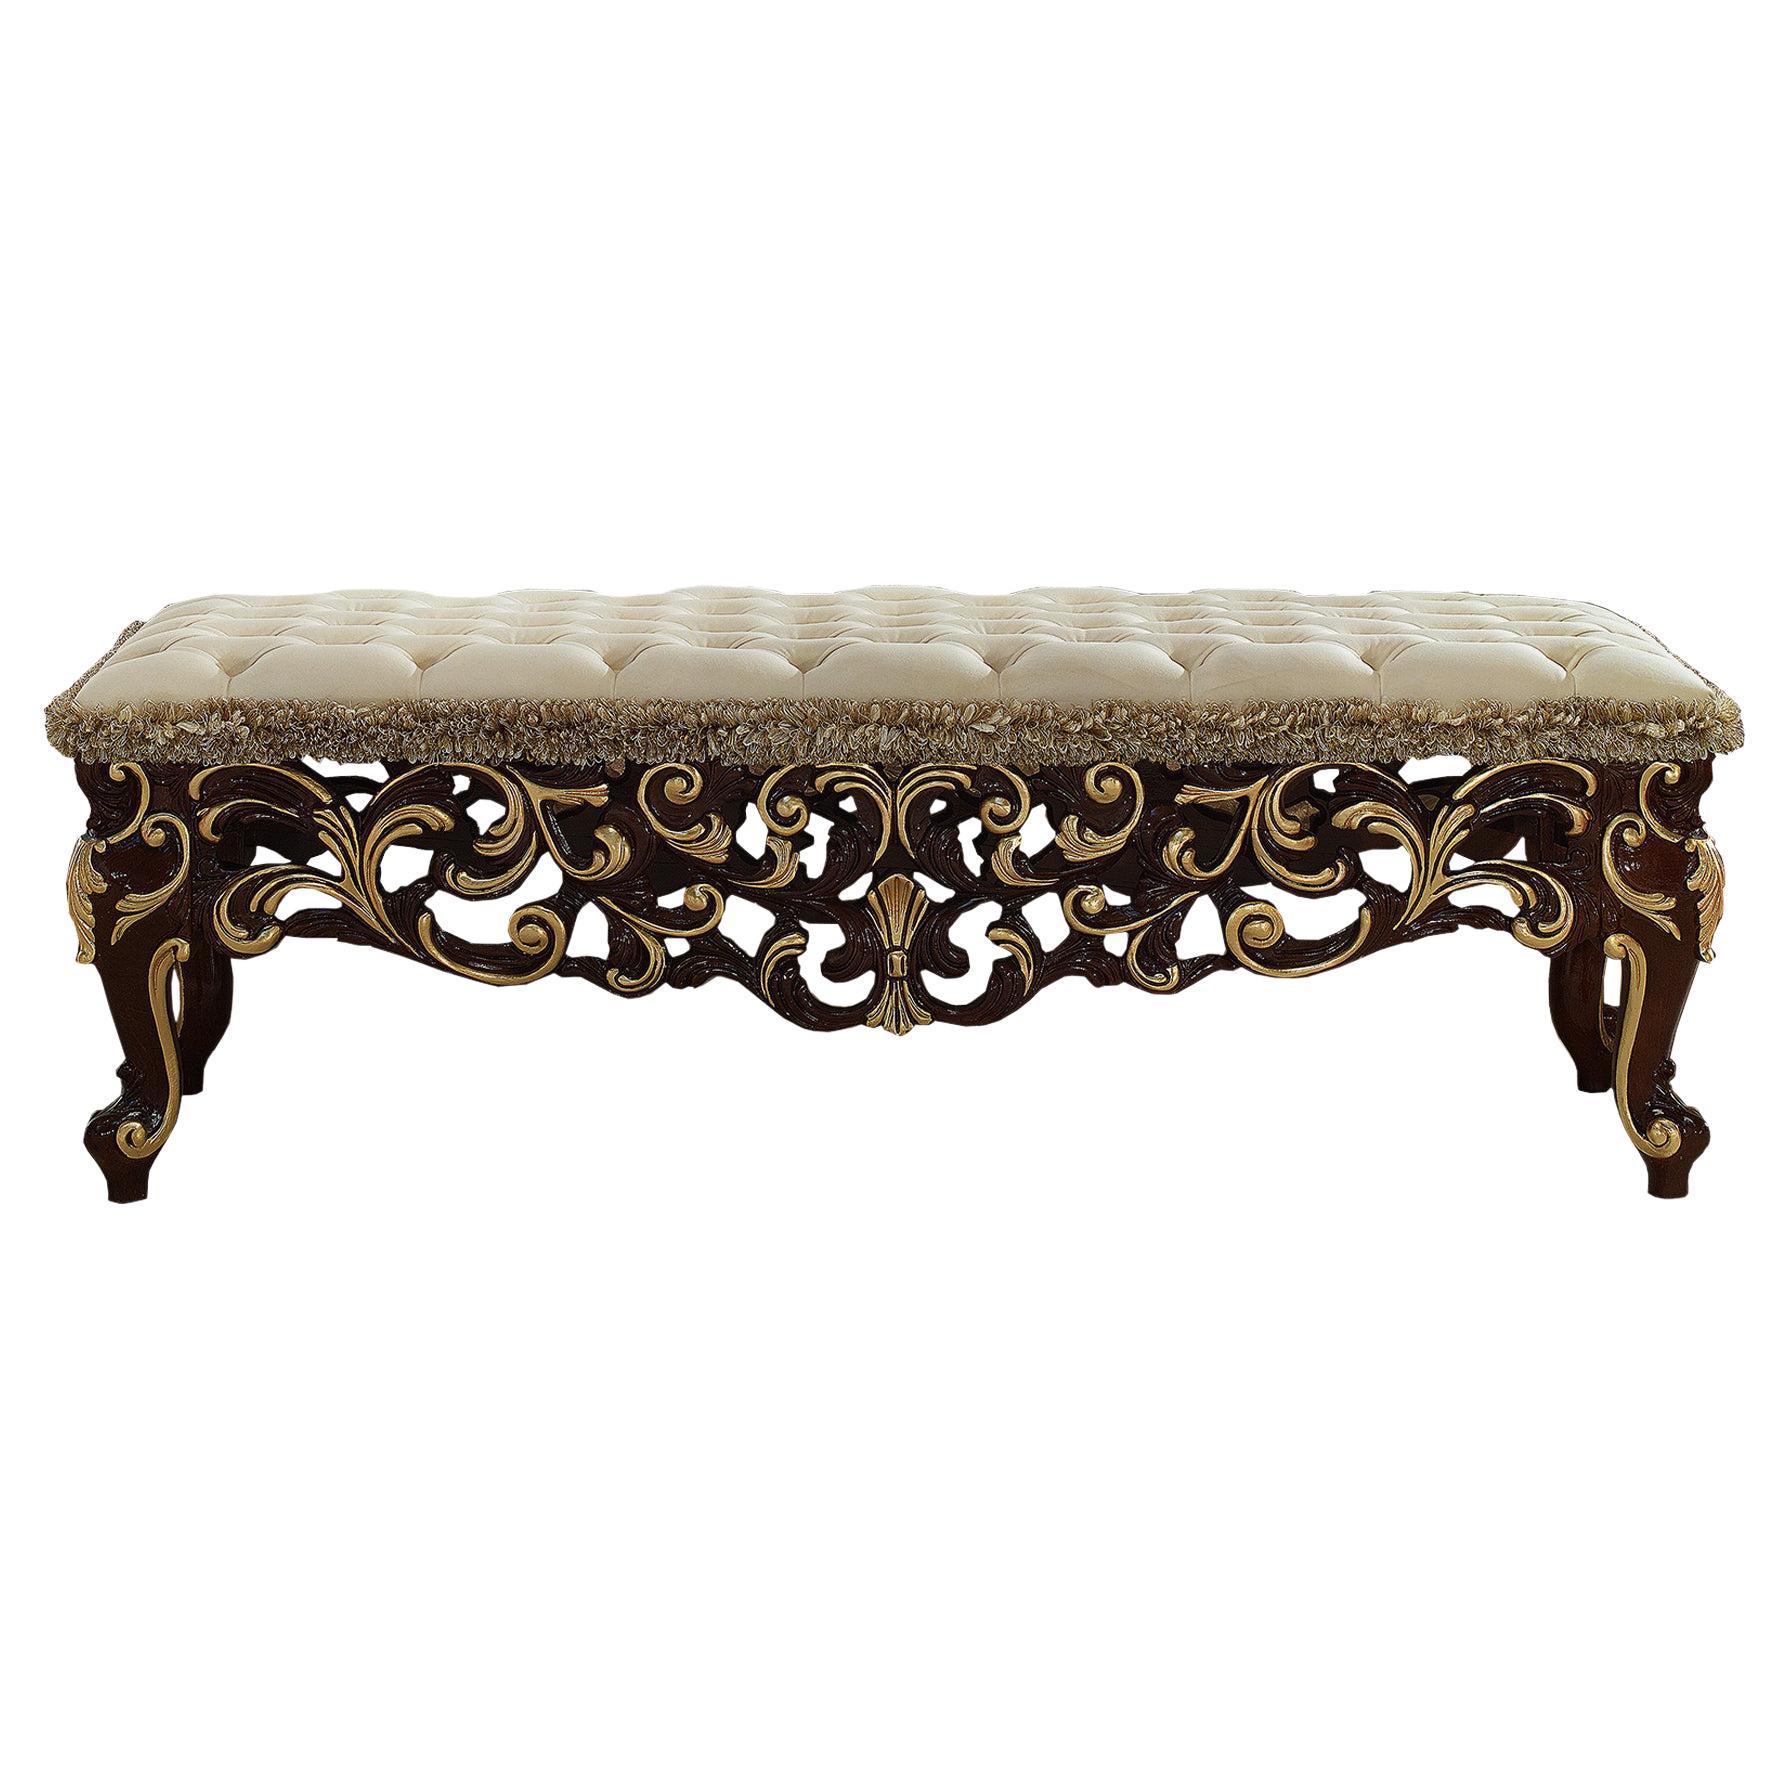 21st Century Rococo-Inspired Handcarved Bed Bench by Modenese Interiors For Sale